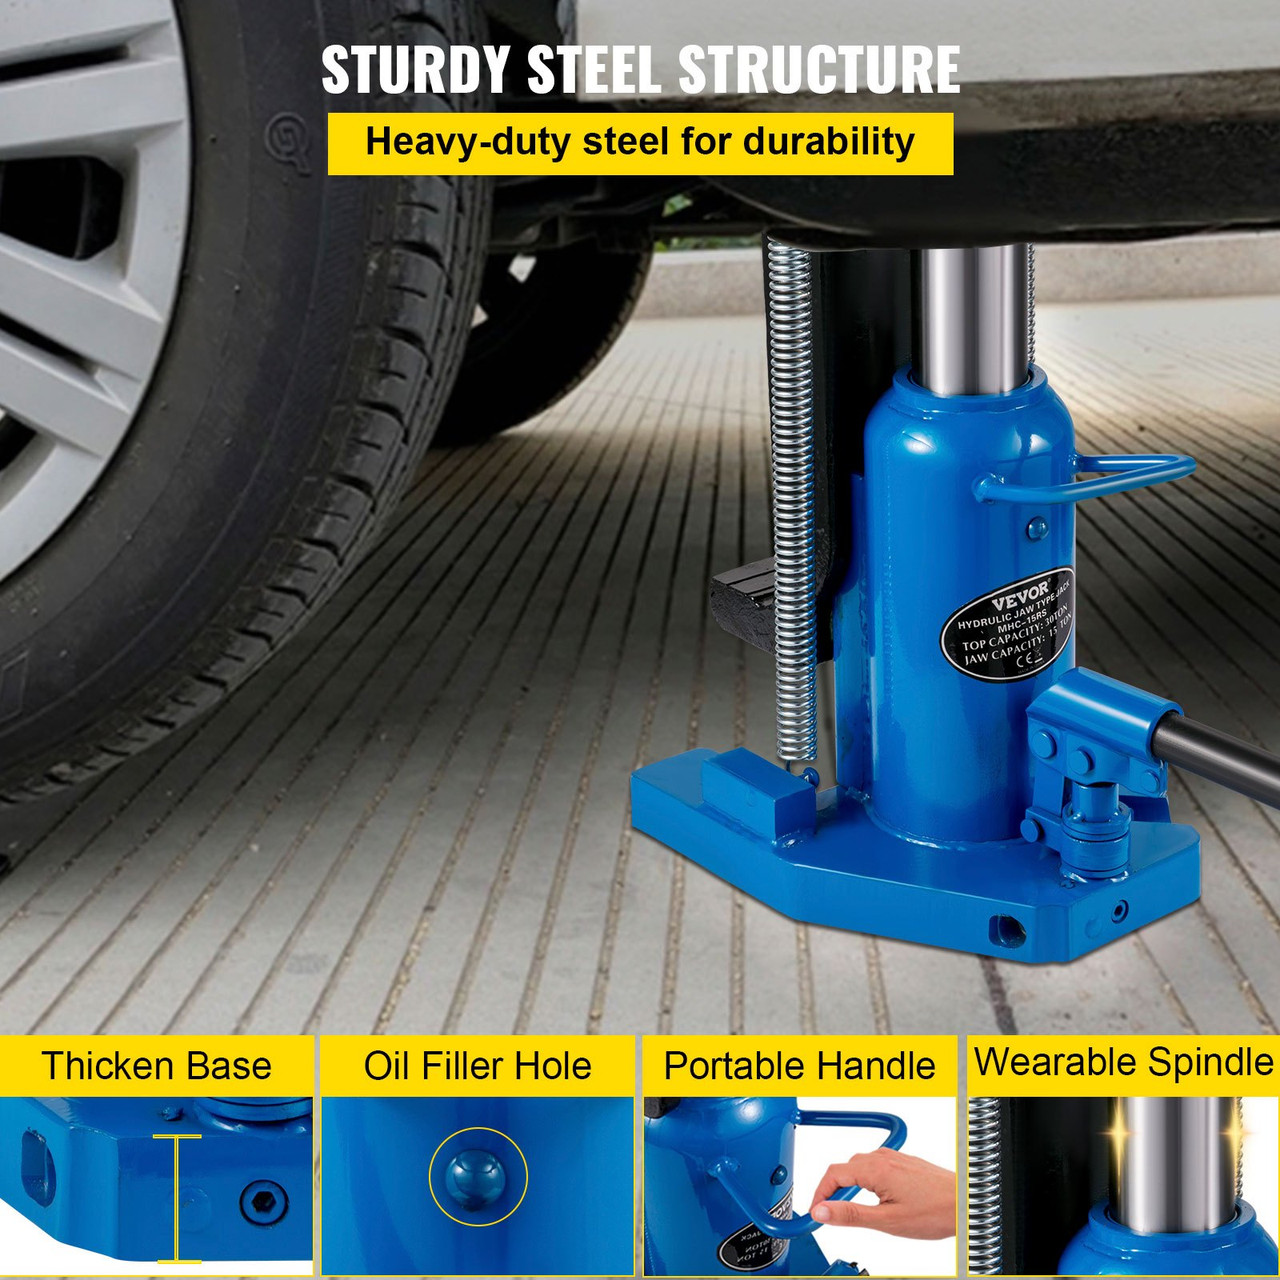 Hydraulic Toe Jack, 15 Ton On Toe Toe Jack Lift, 30 Ton On Top Lift Capacity Machine Jack, 6-1/5 in Stork Air Hydraulic Toe Jack, Heavy-Duty Steel Hydraulic Claw Jack for Machinery, Industry